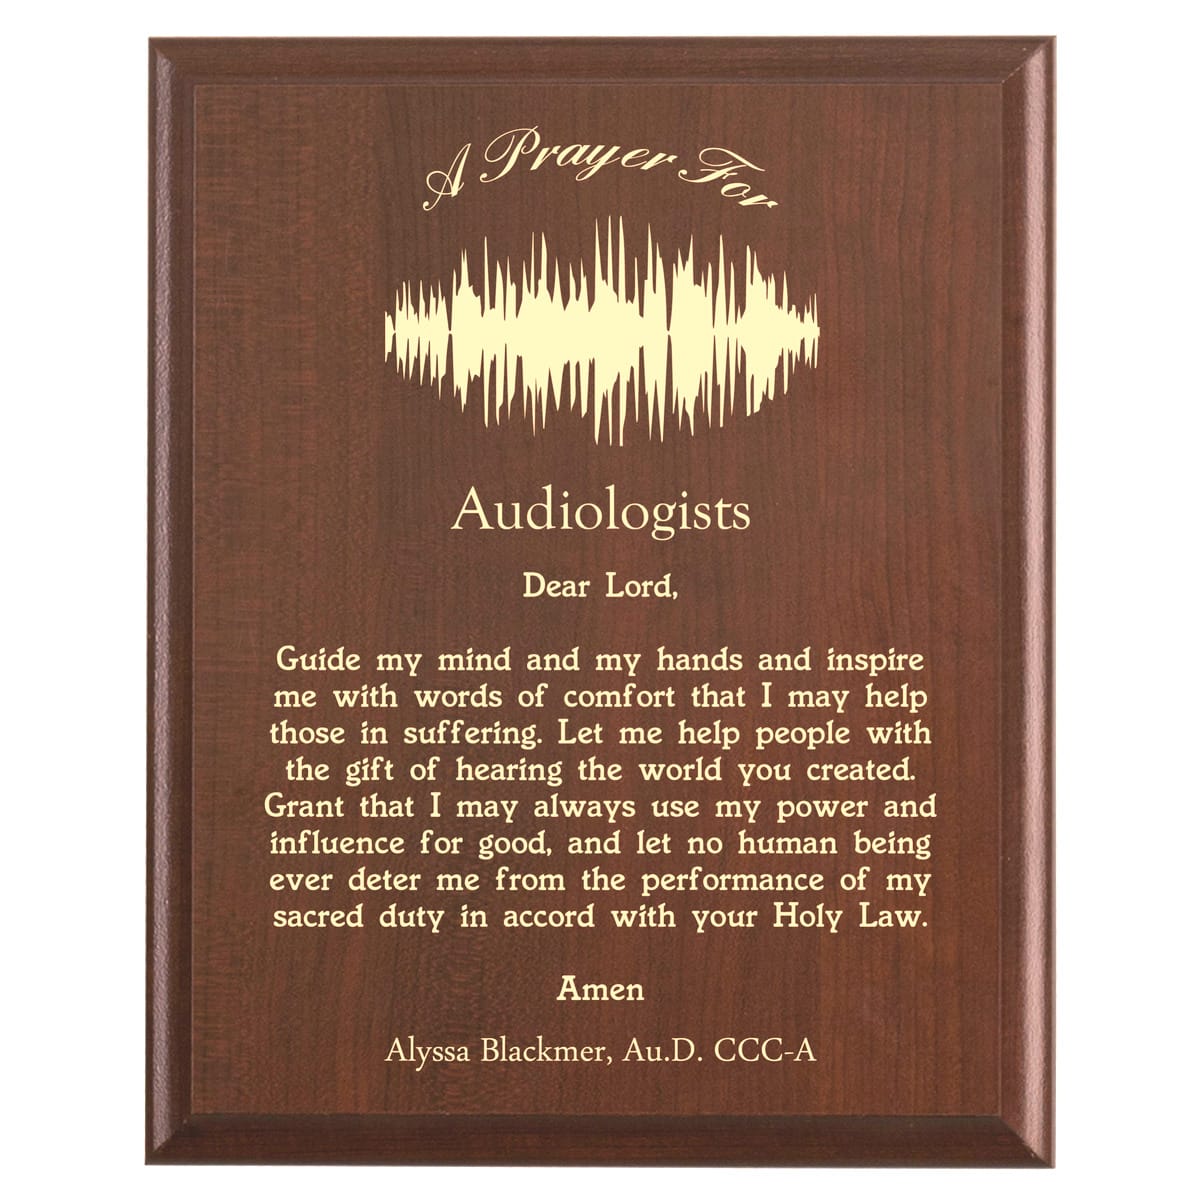 Plaque photo: Audiologist Prayer Plaque design with free personalization. Wood style finish with customized text.